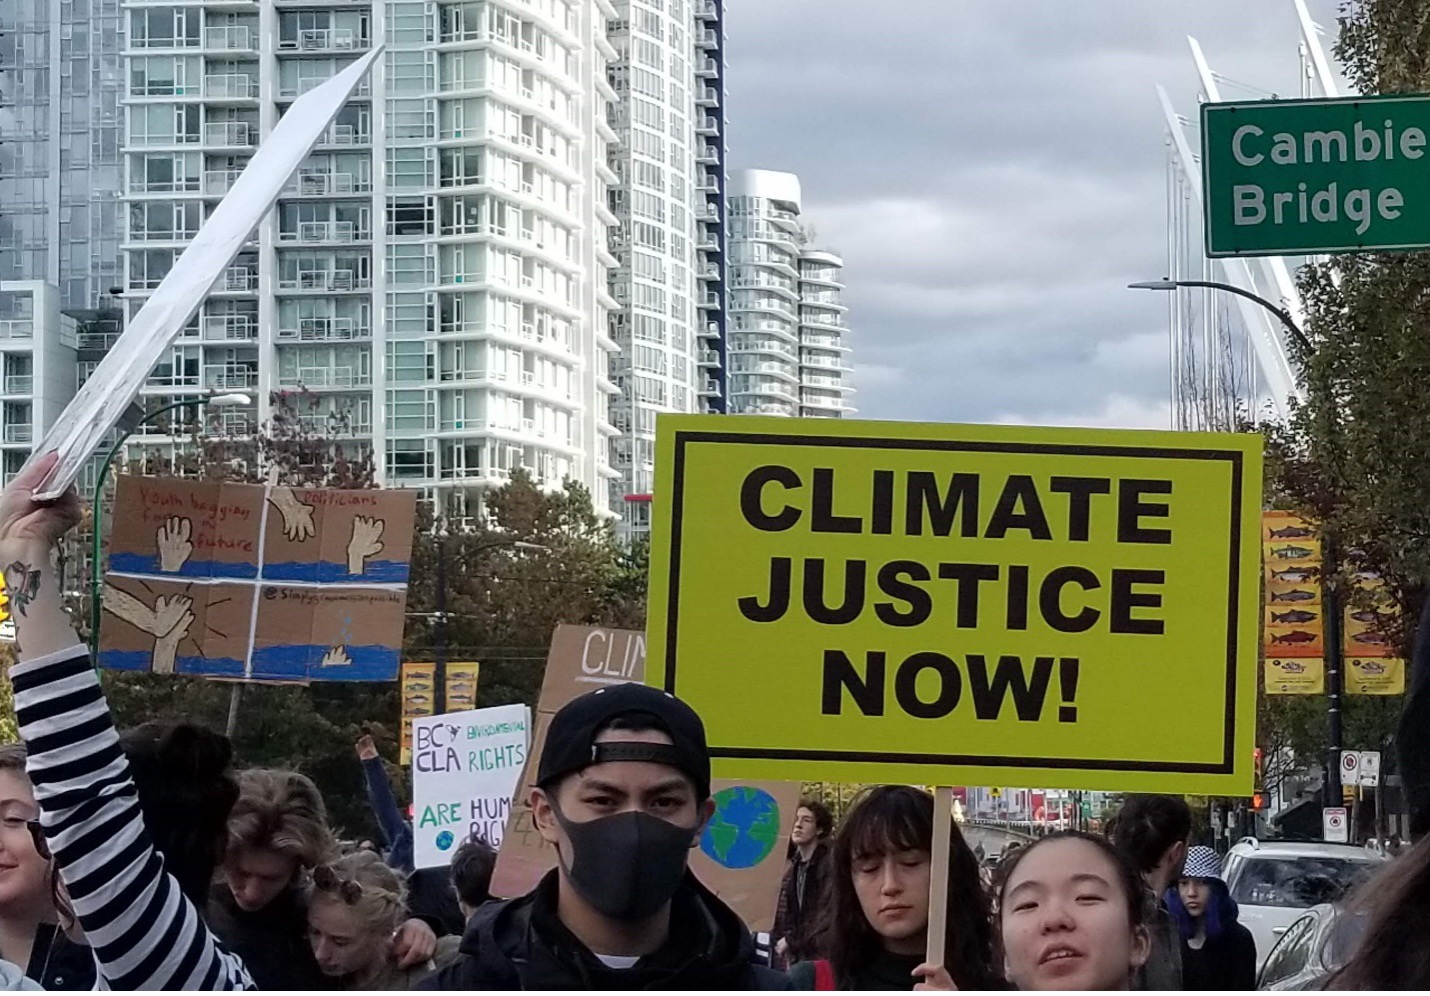 Sign says Climate Justice Now!